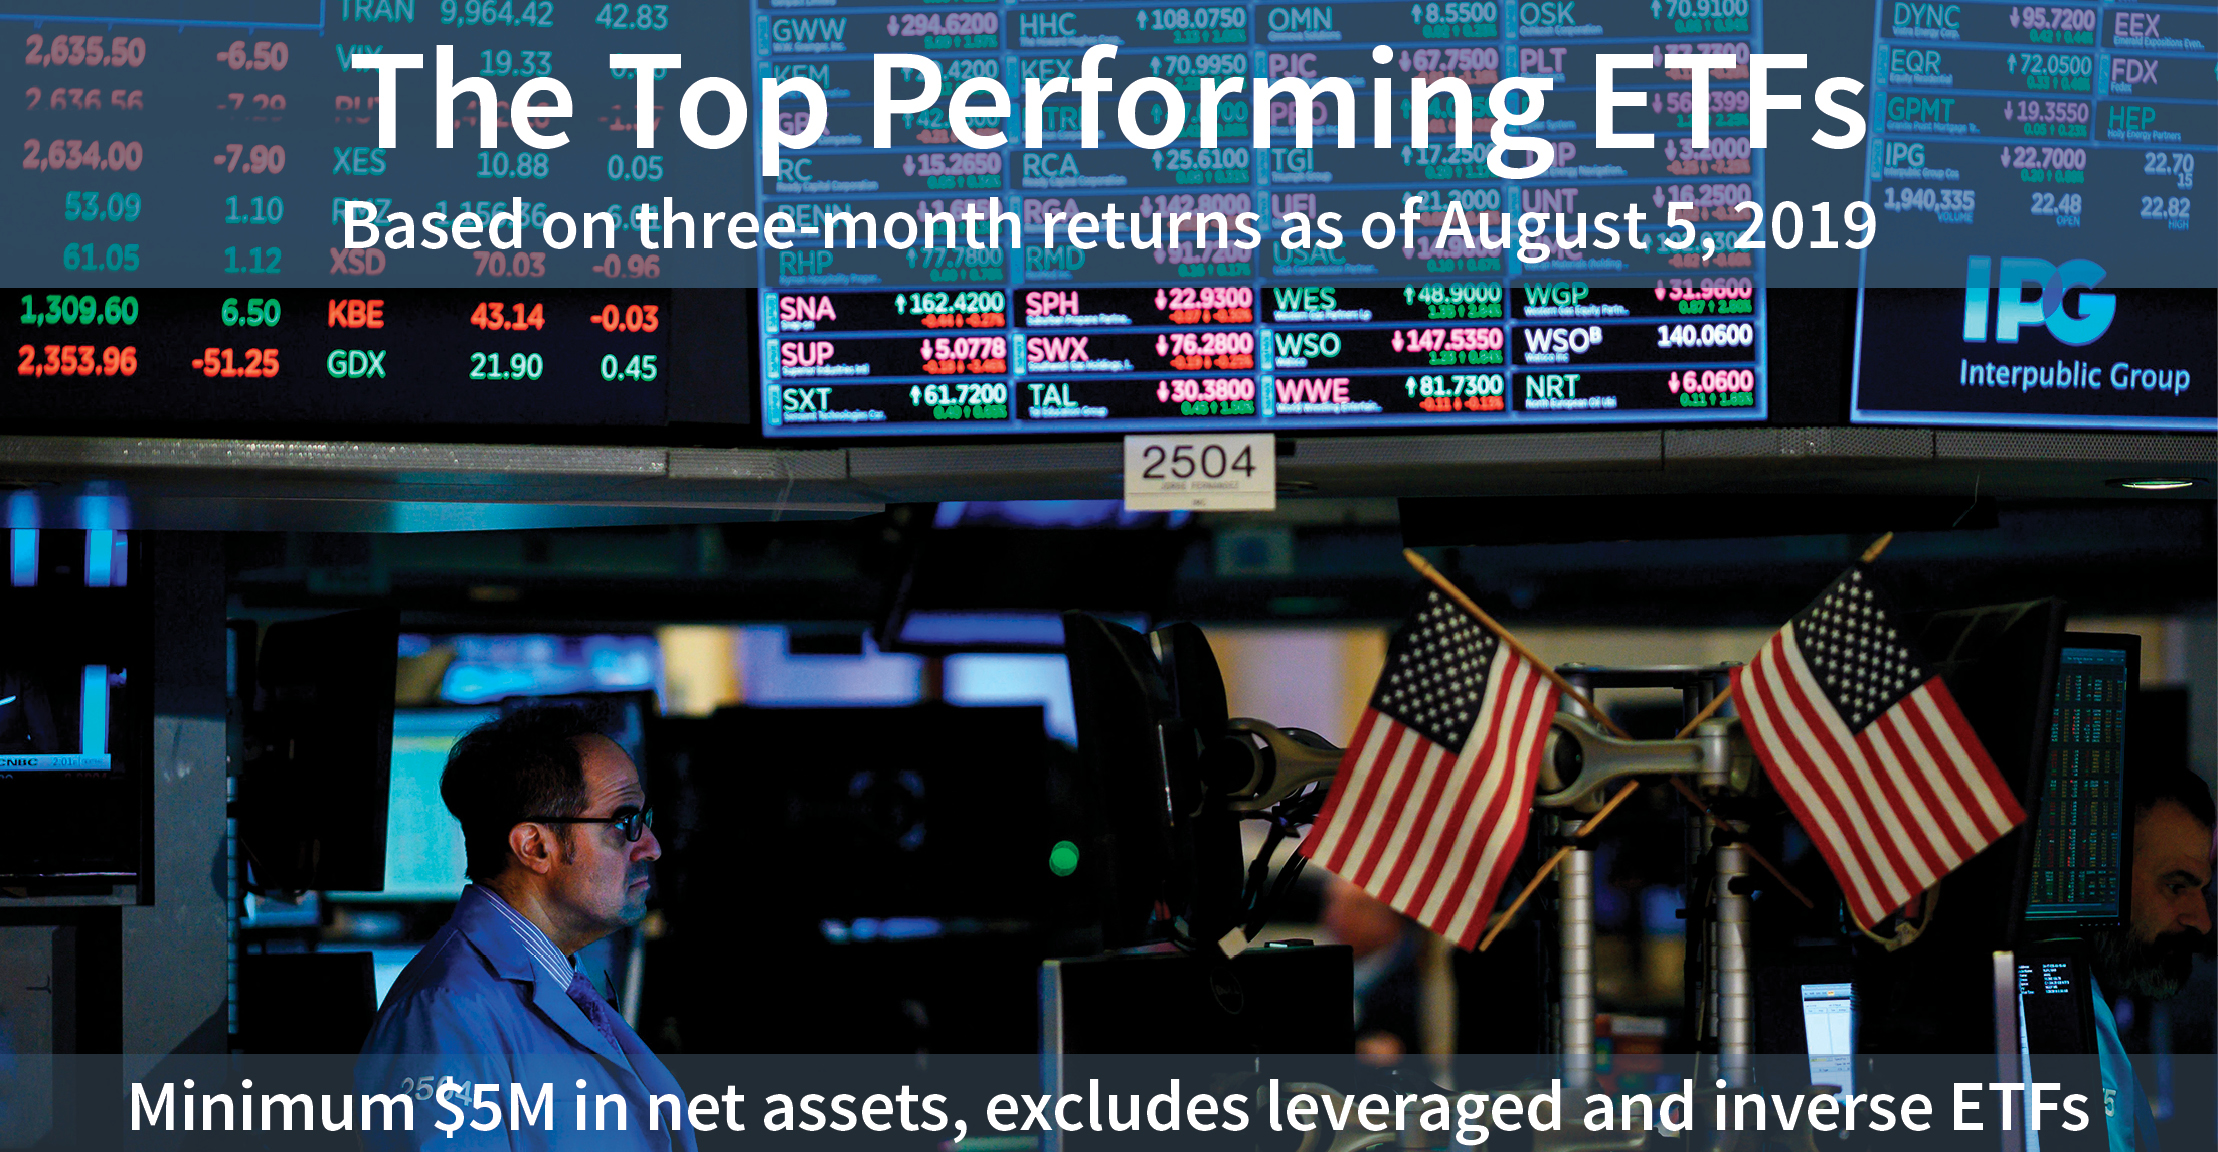 The Top Performing ETFs Wealth Management